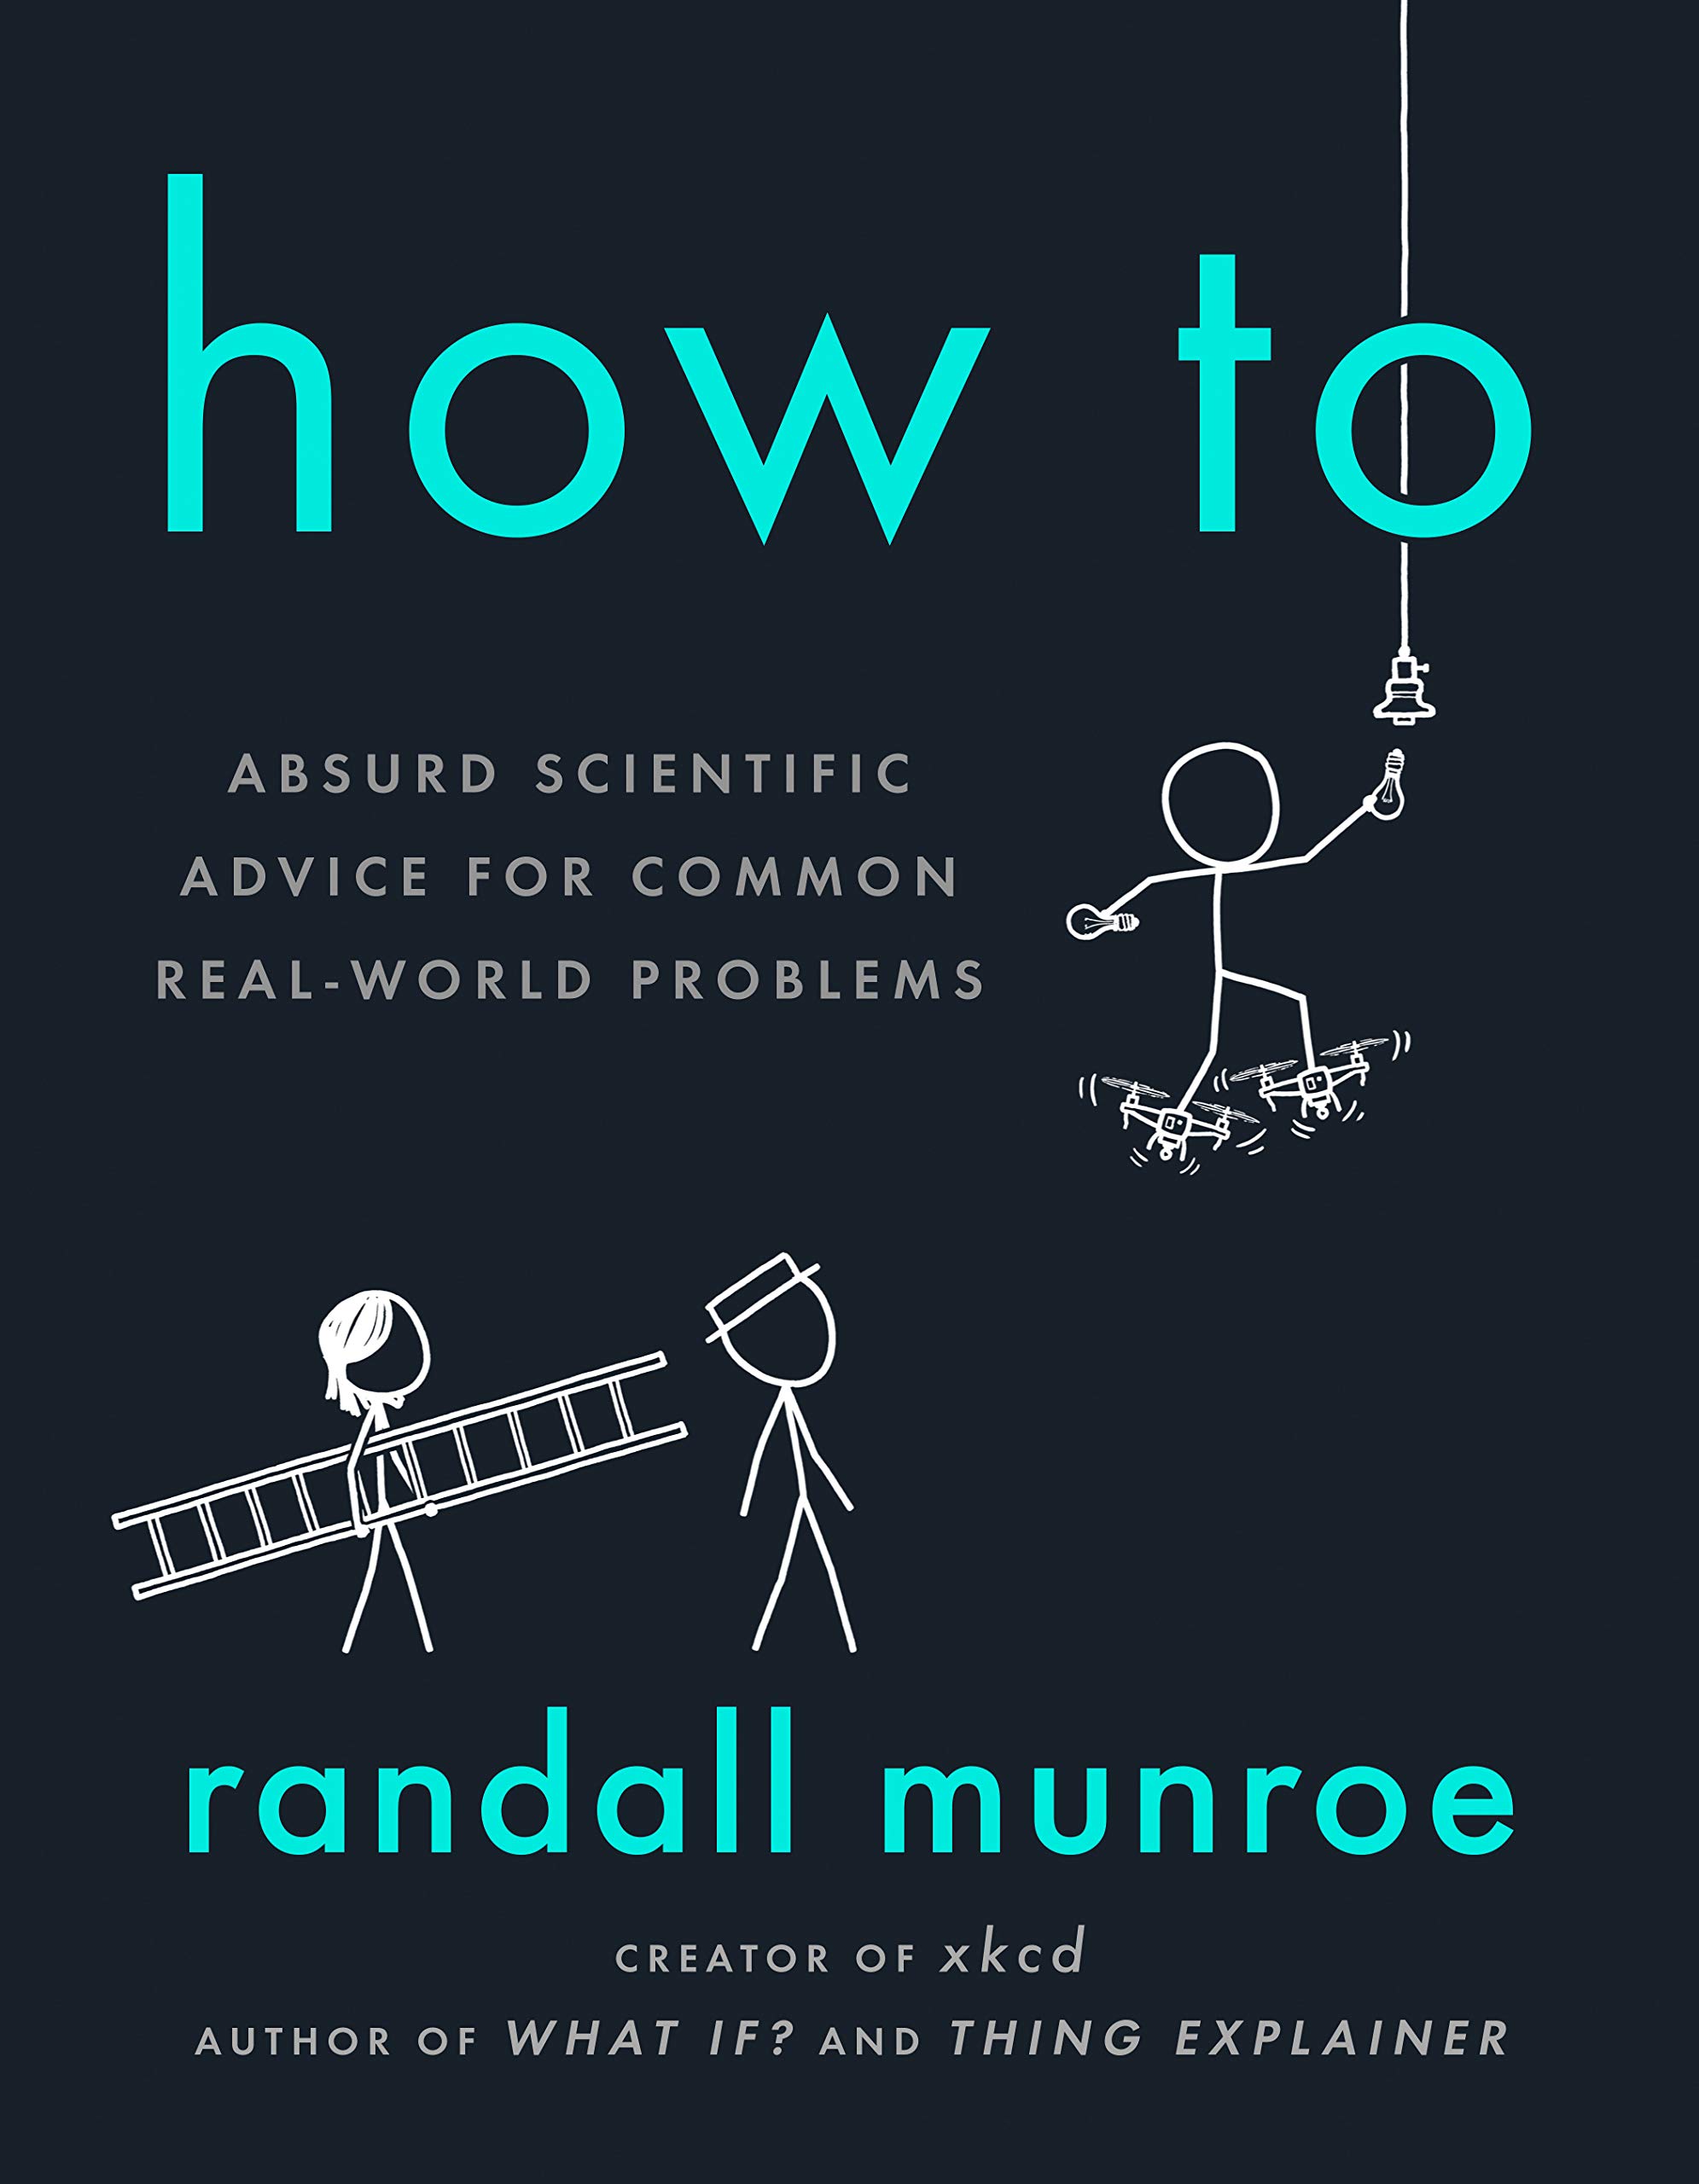 How To: Absurd Scientific Advice for Common Real-World Problems by Randall Munroe